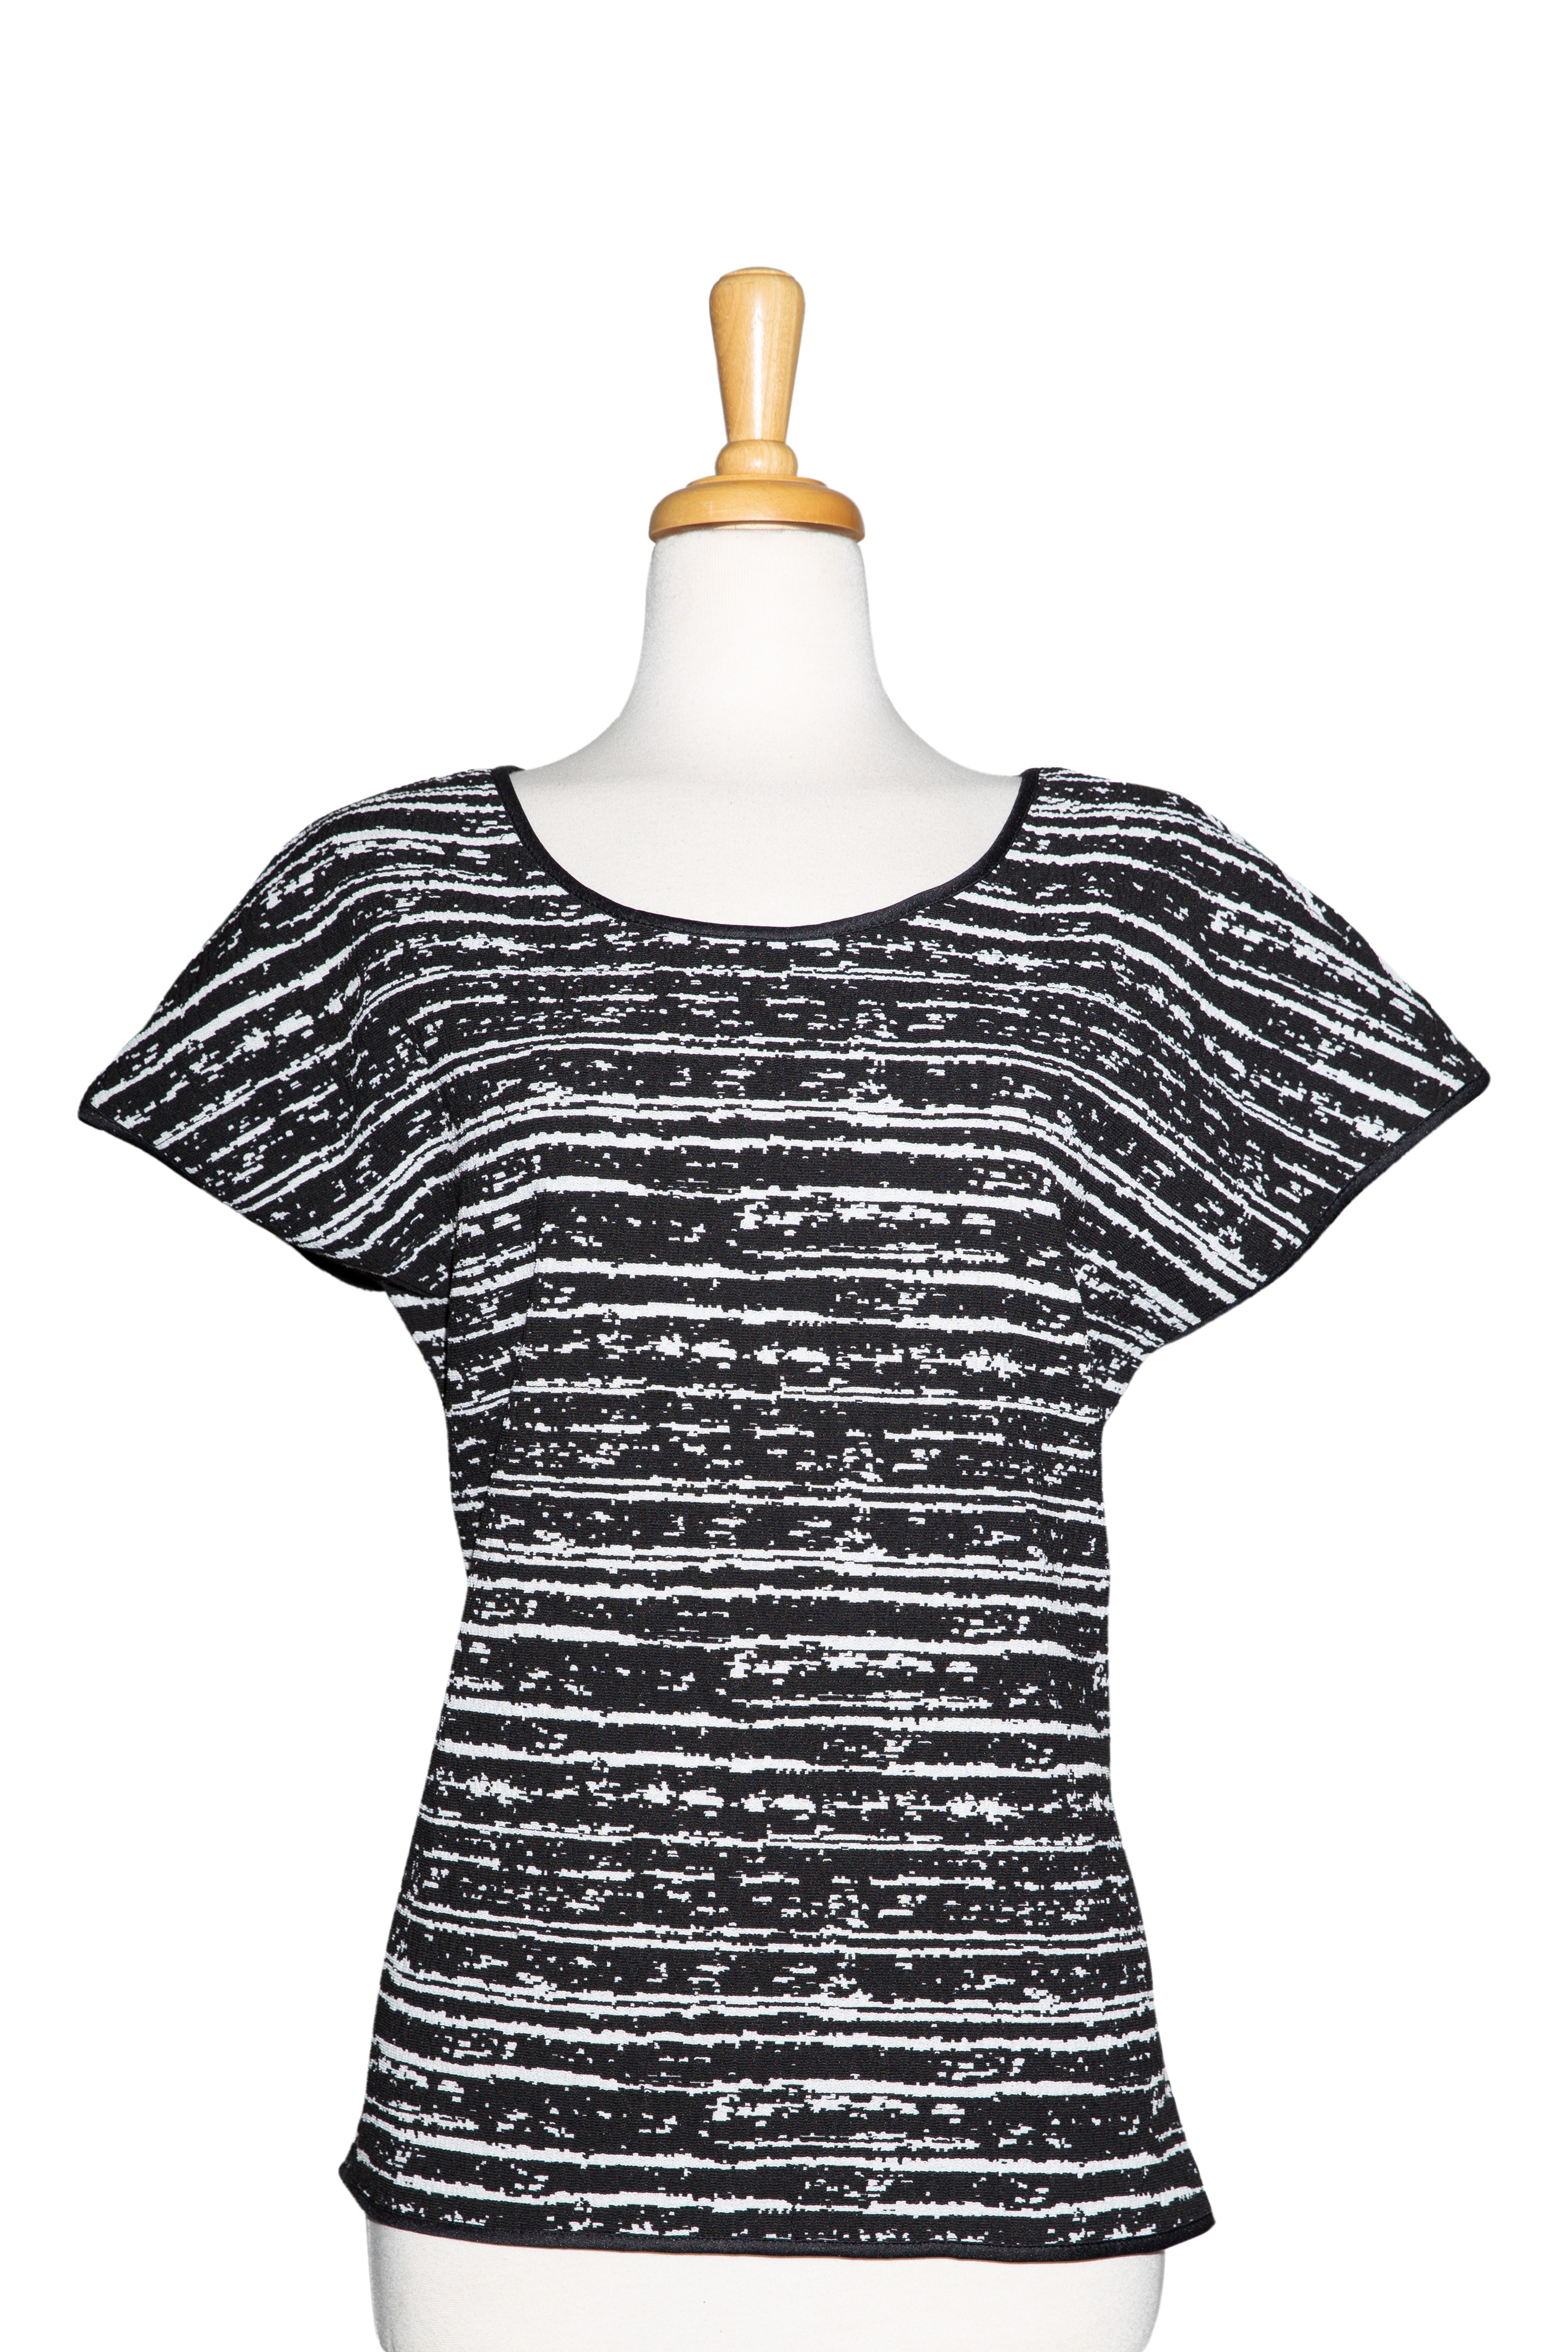 Black and White Tweed Knit Short Sleeve Top